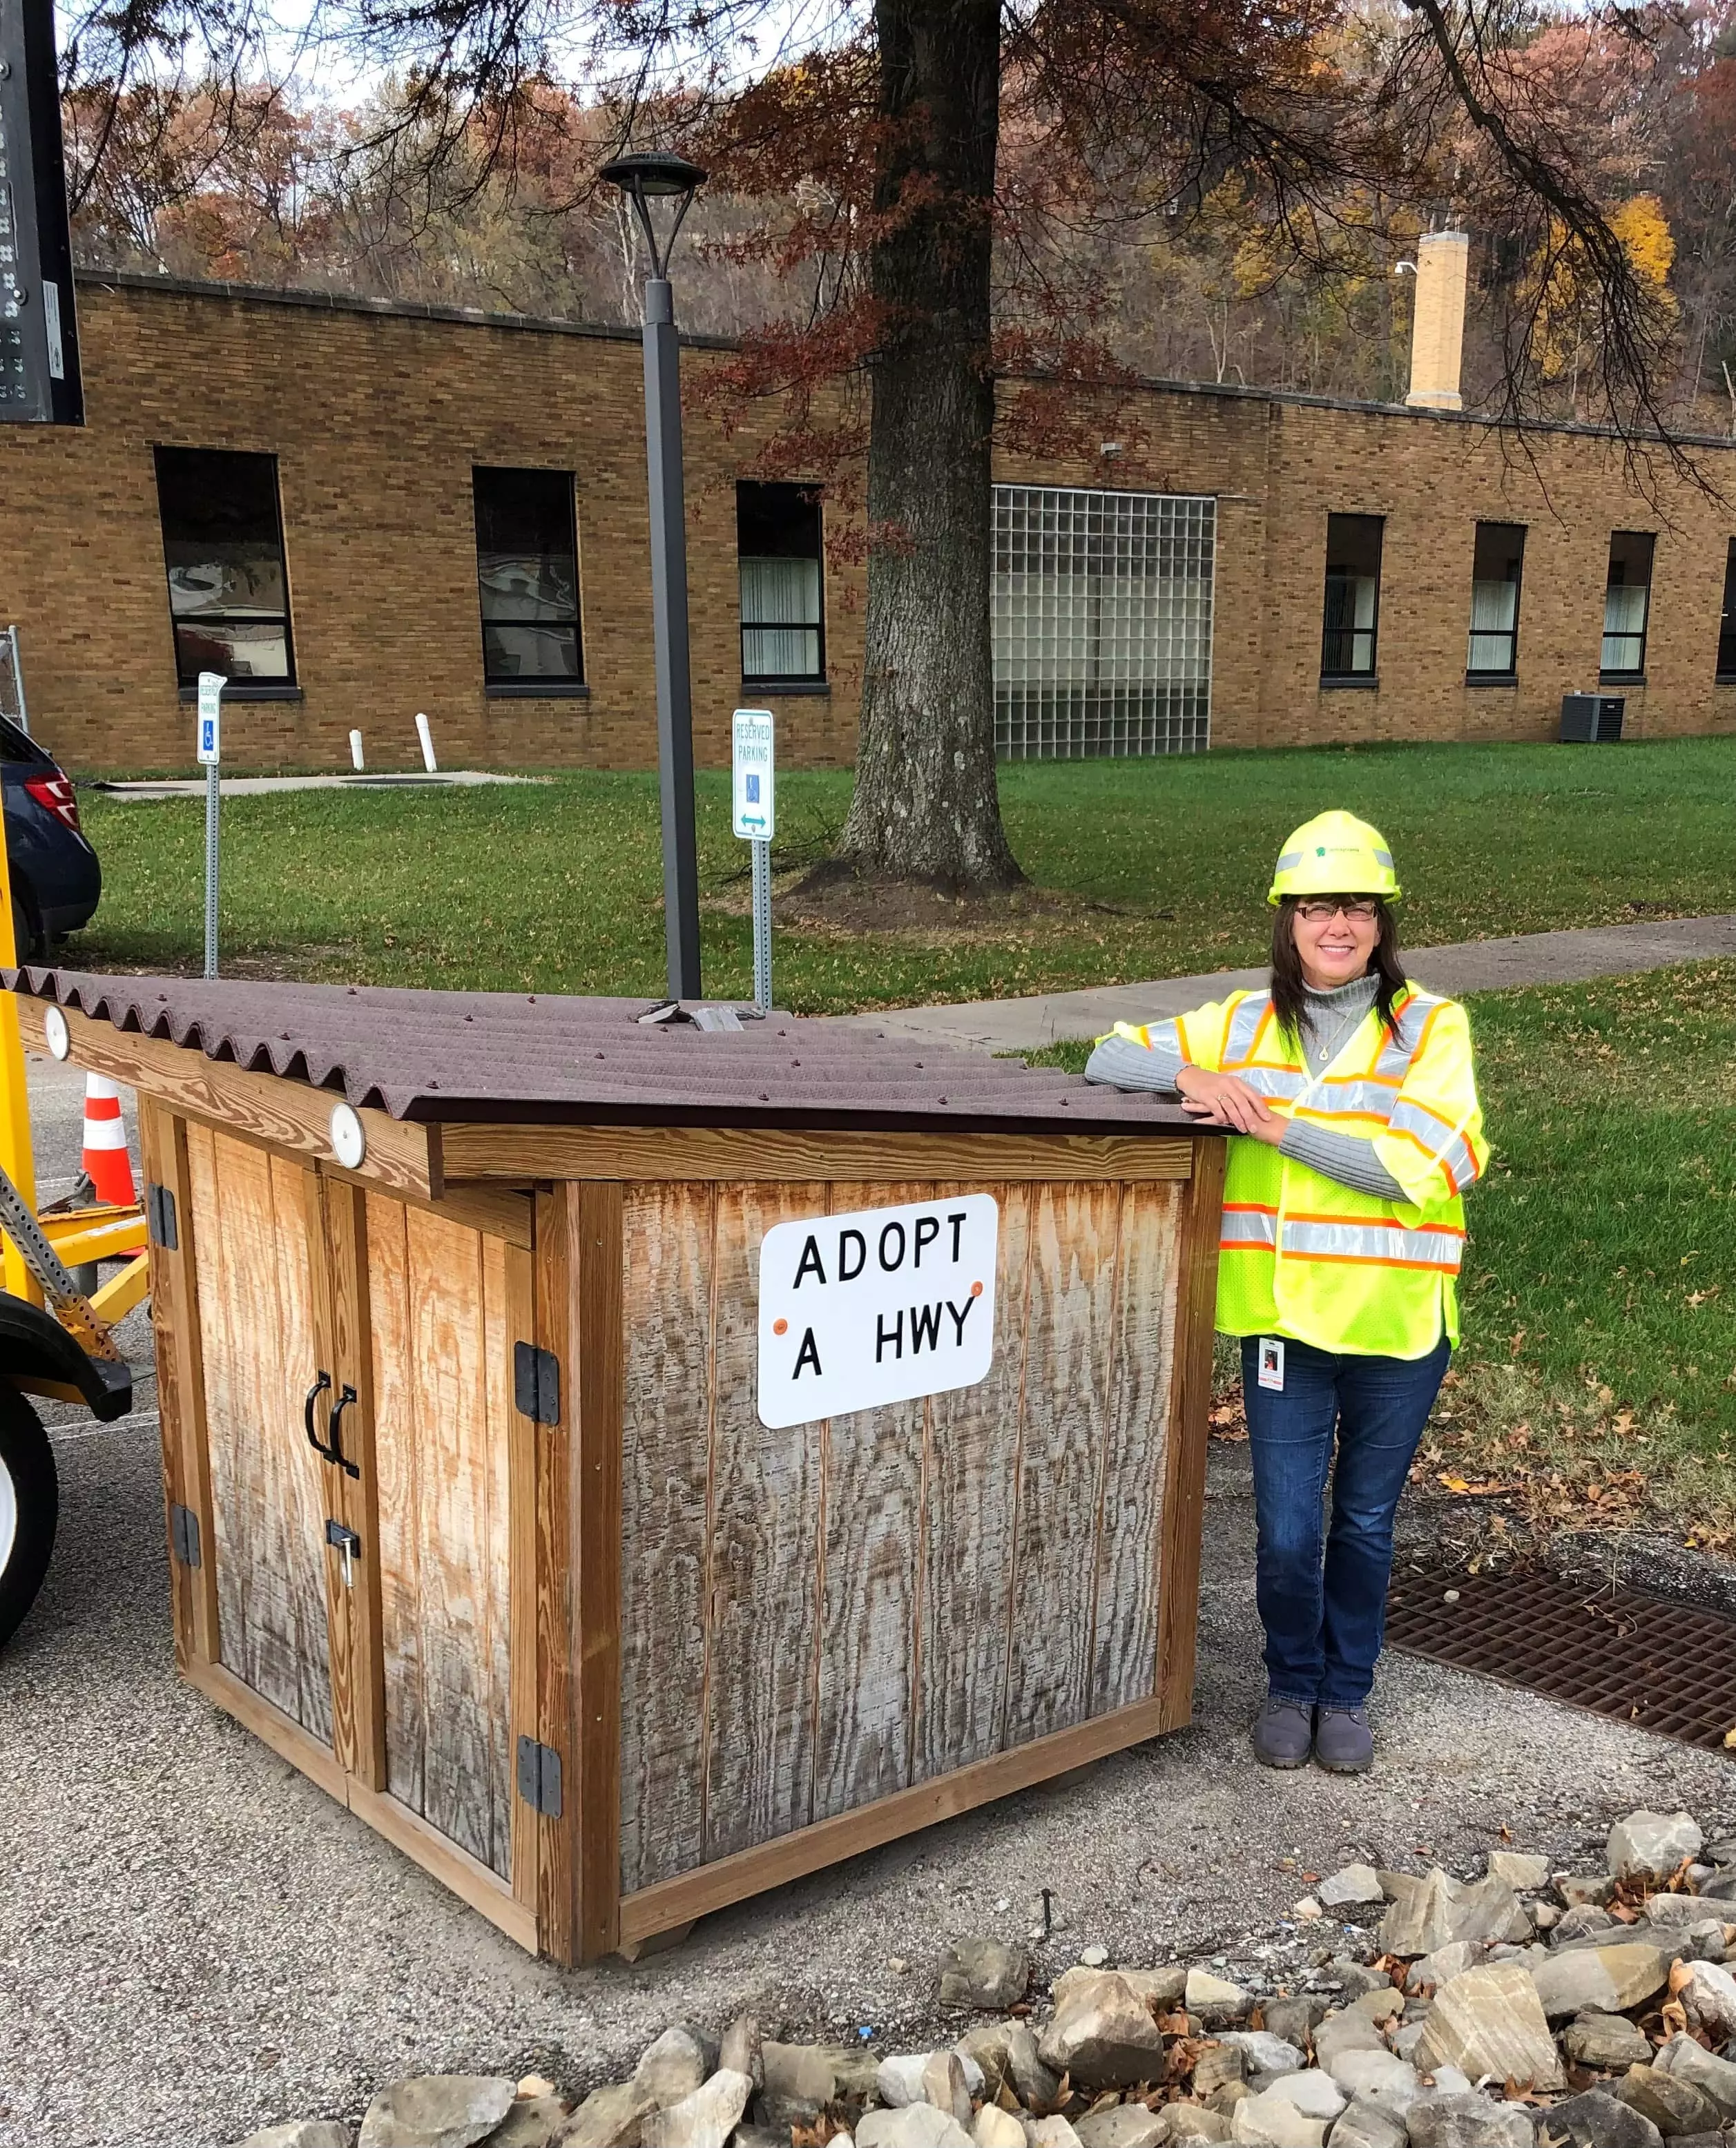 An employee stands next to a small shed serving as the Adopt A Highway supply pick-up box.